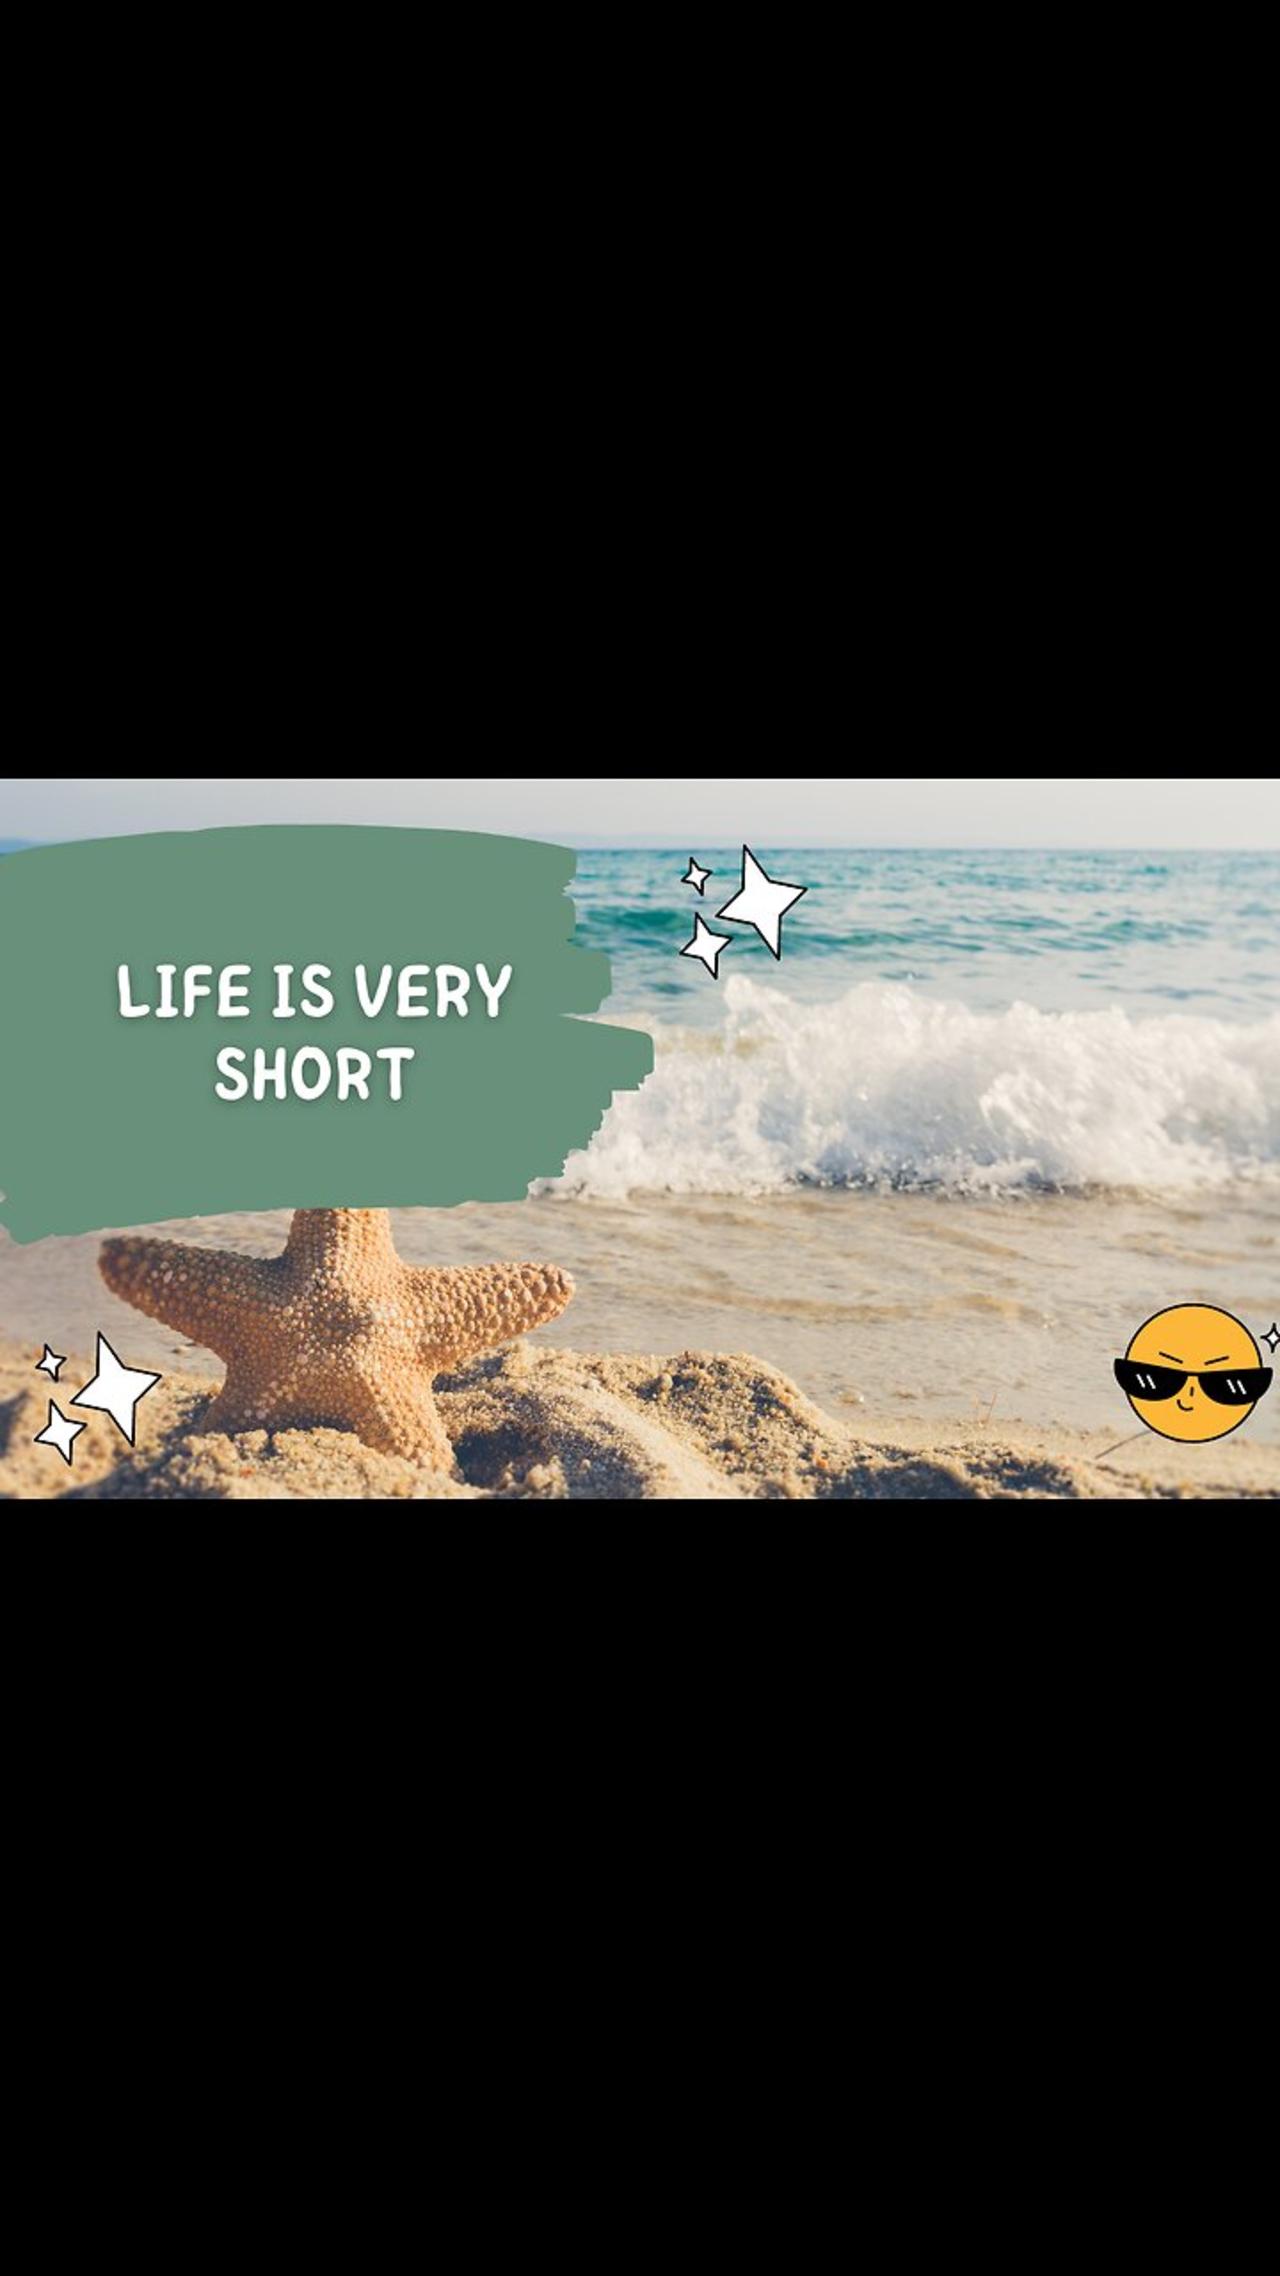 Life is very short